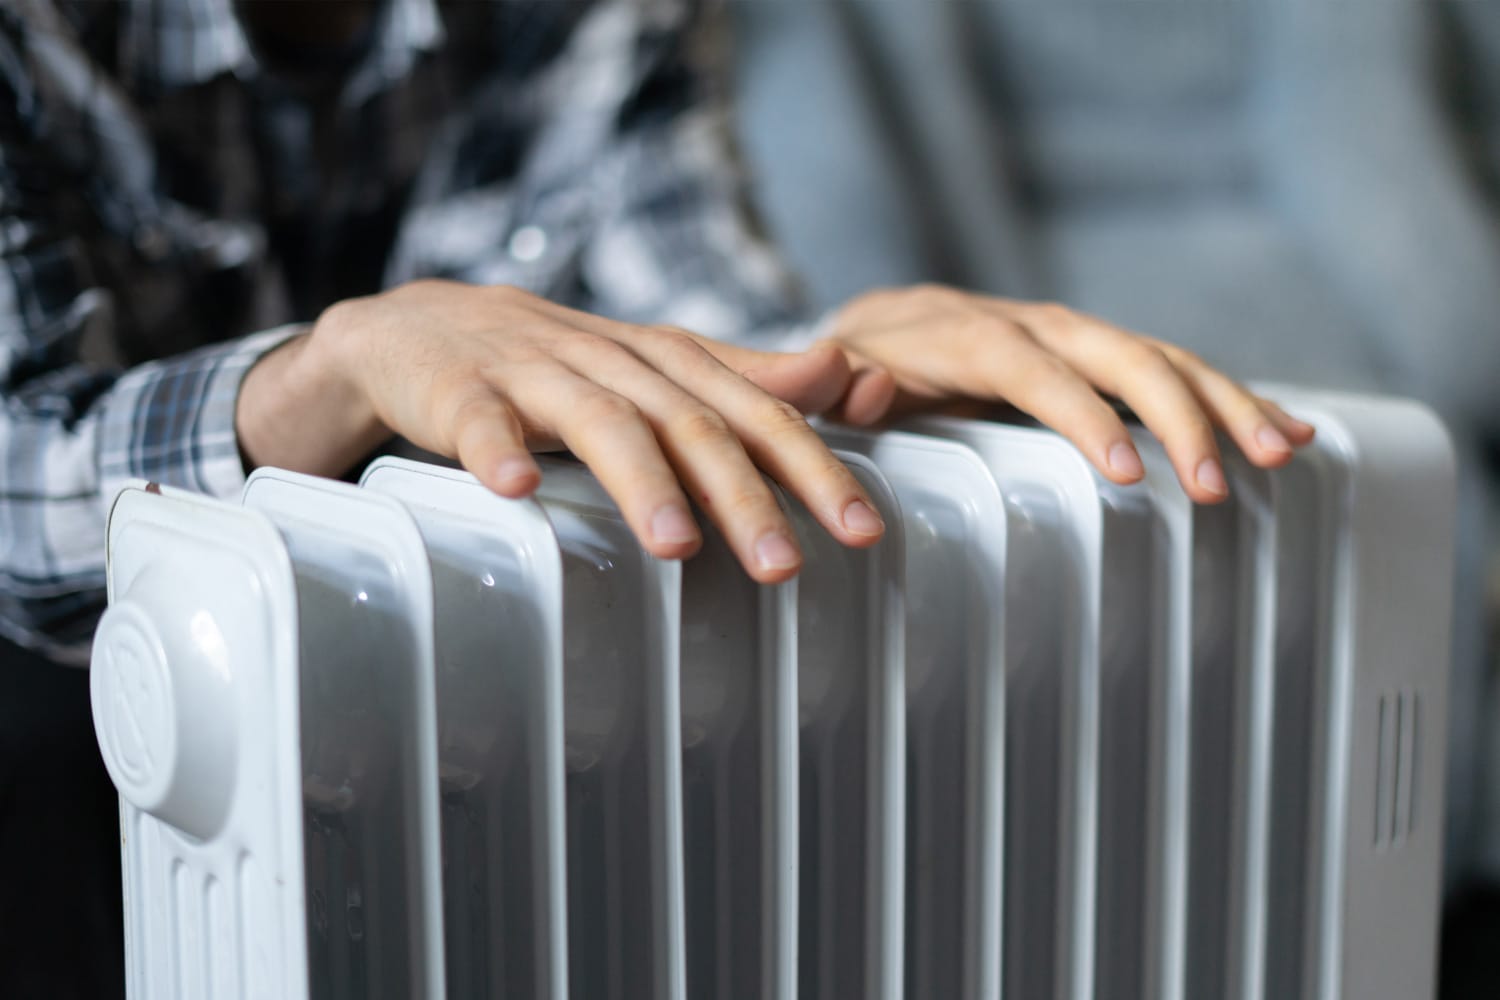 Feeling cold, getting warm, hands touching the heater